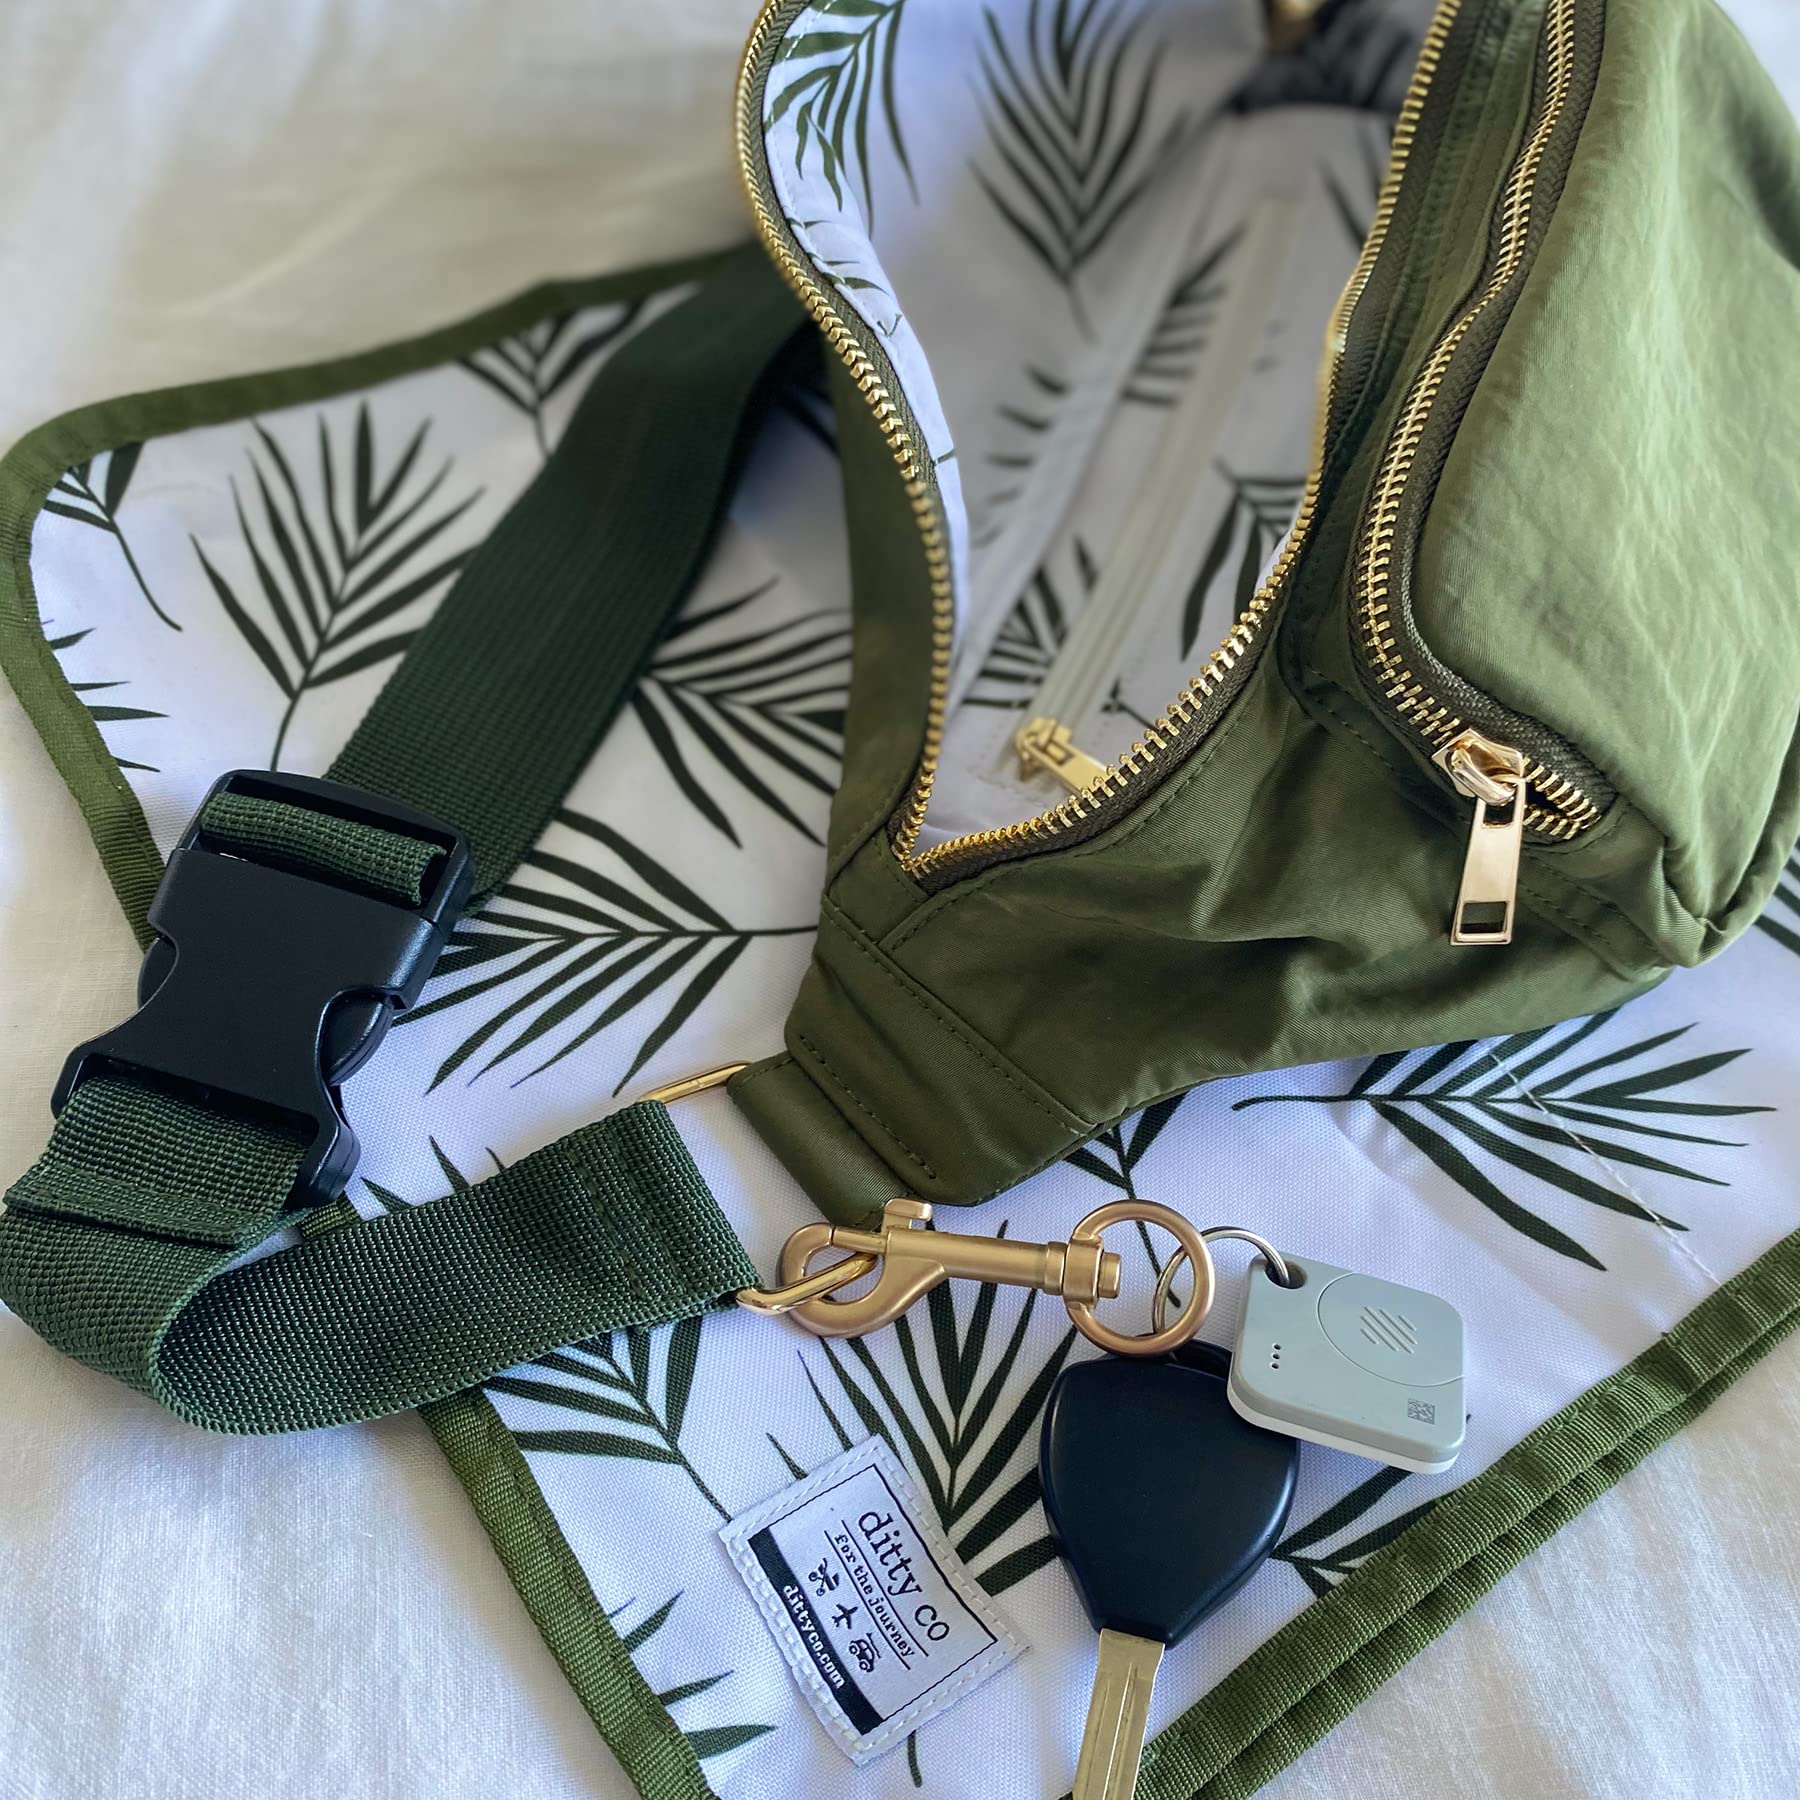 Ditty Co. Small Diaper Bag - Portable Changing Pad - Crossbody Bags For Women - Baby Wipe Holder - Baby Travel Essentials (Olive Green)